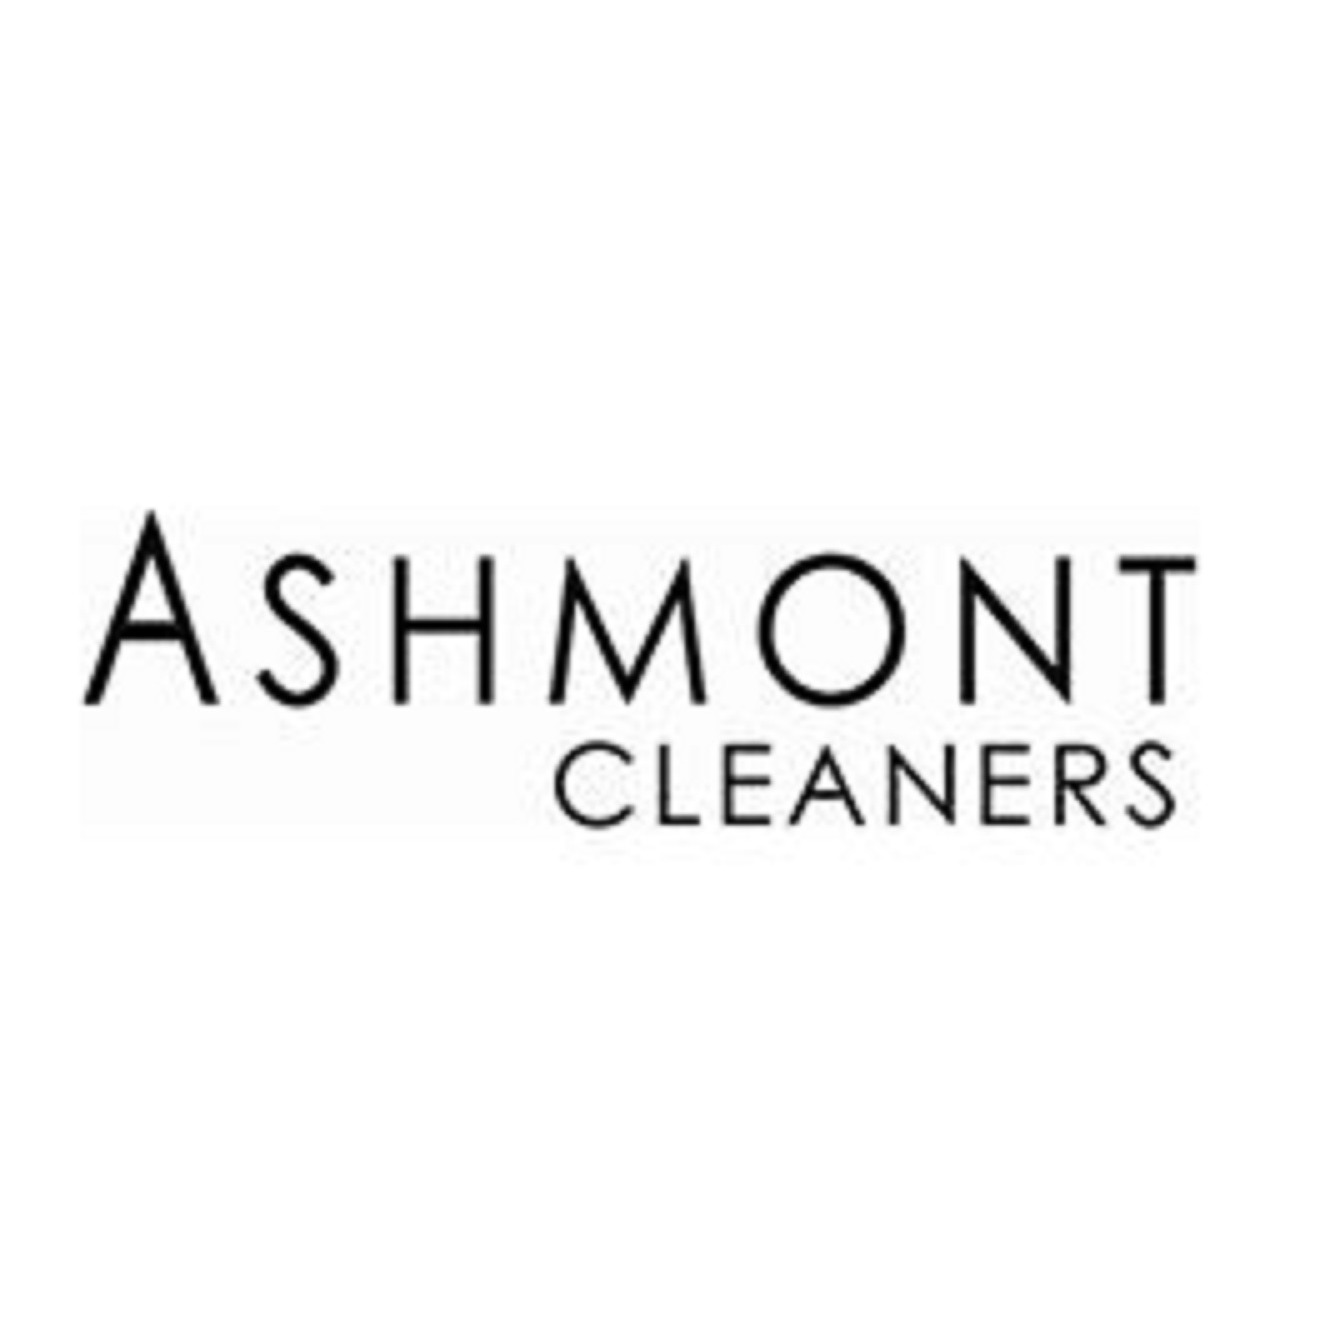 Ashmont Cleaners